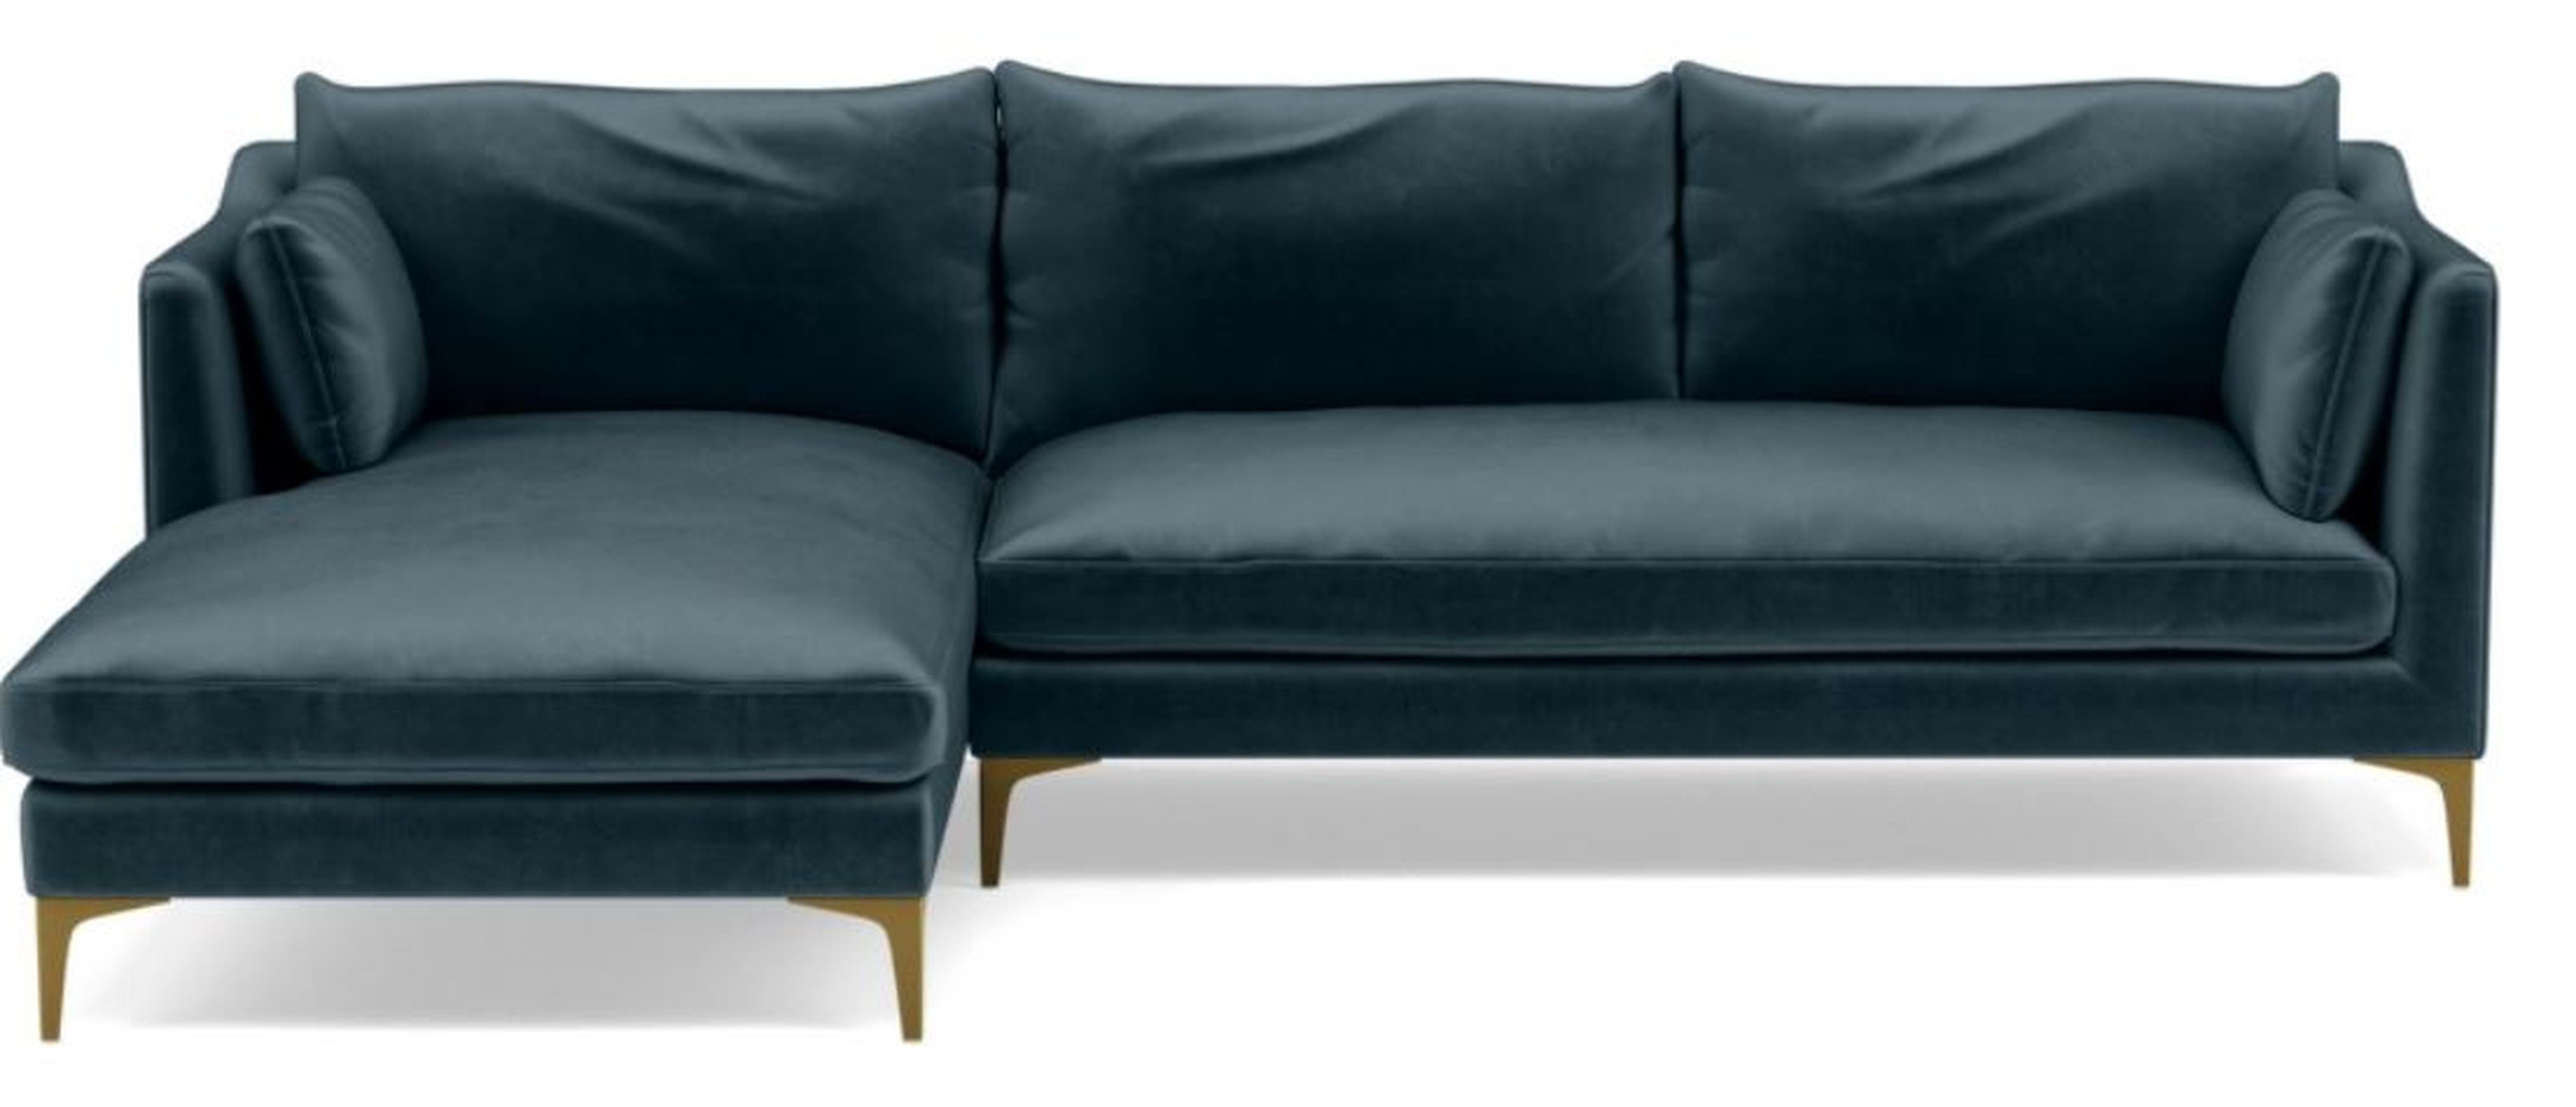 CAITLIN BY THE EVERYGIRL Sectional Sofa with Left Chaise - Sapphire - Brass Plated Sloan L Leg - Two Cushions - Interior Define